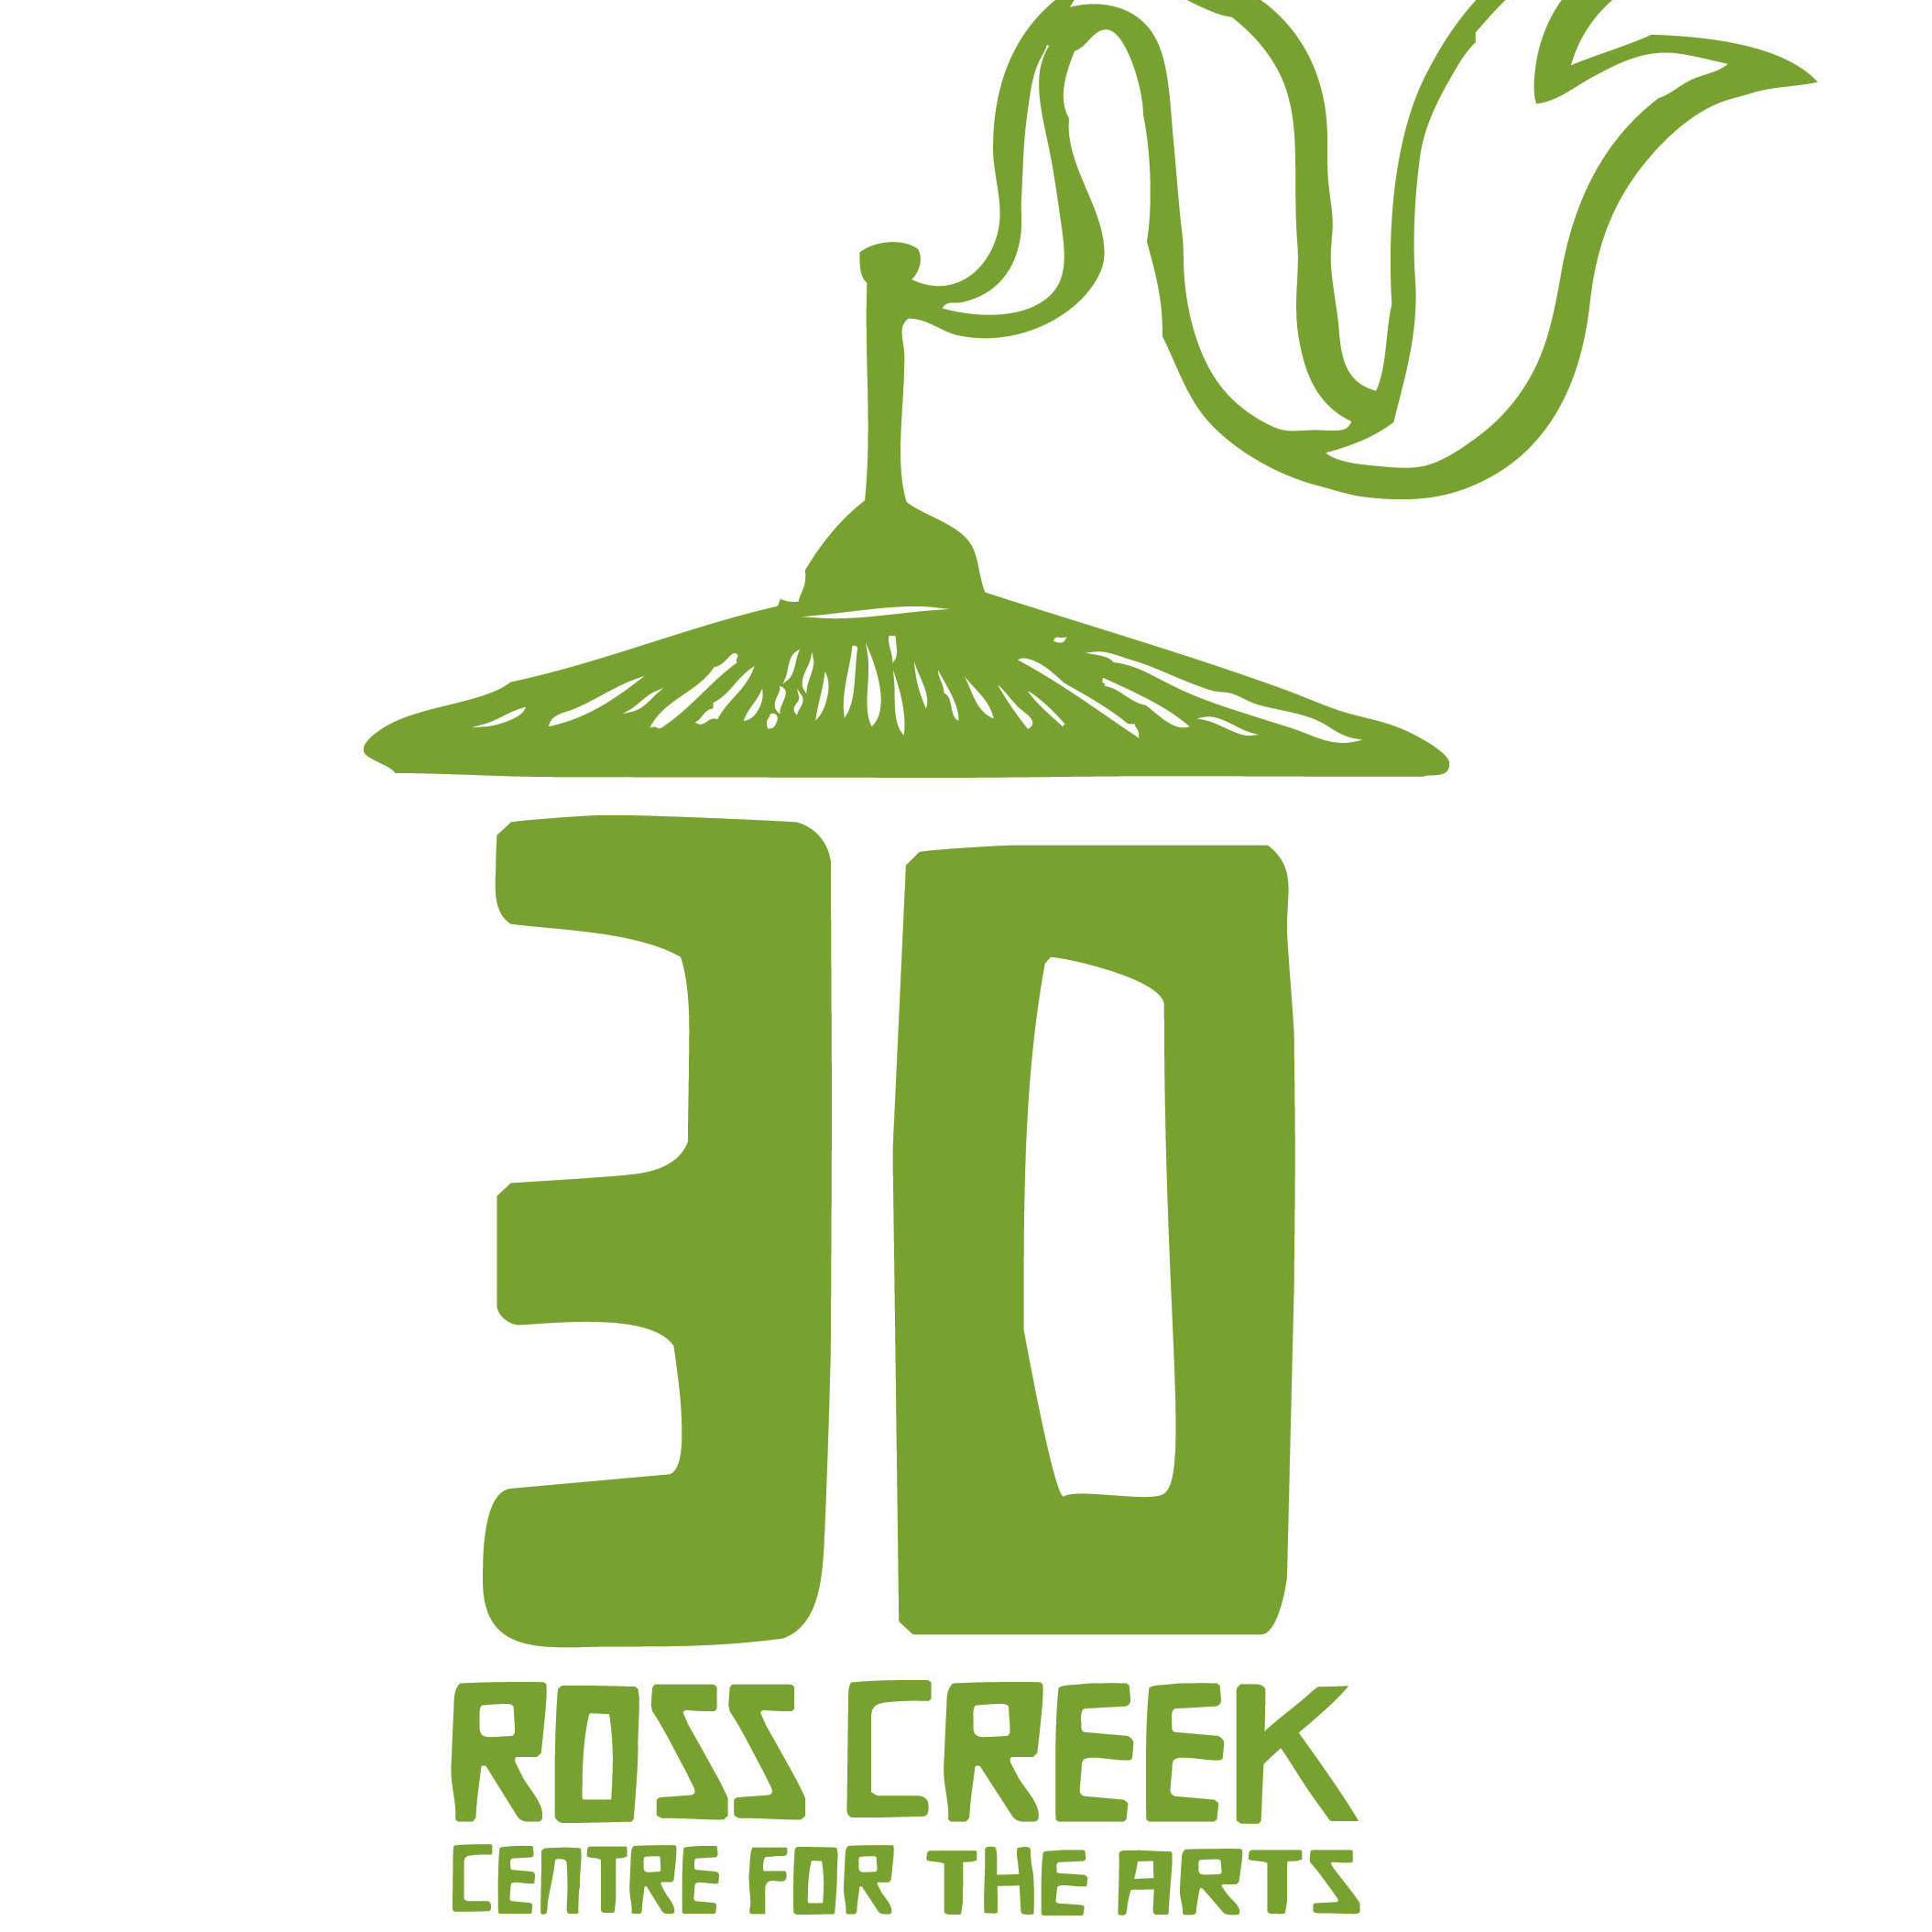 Ross Creek Centre for the Arts